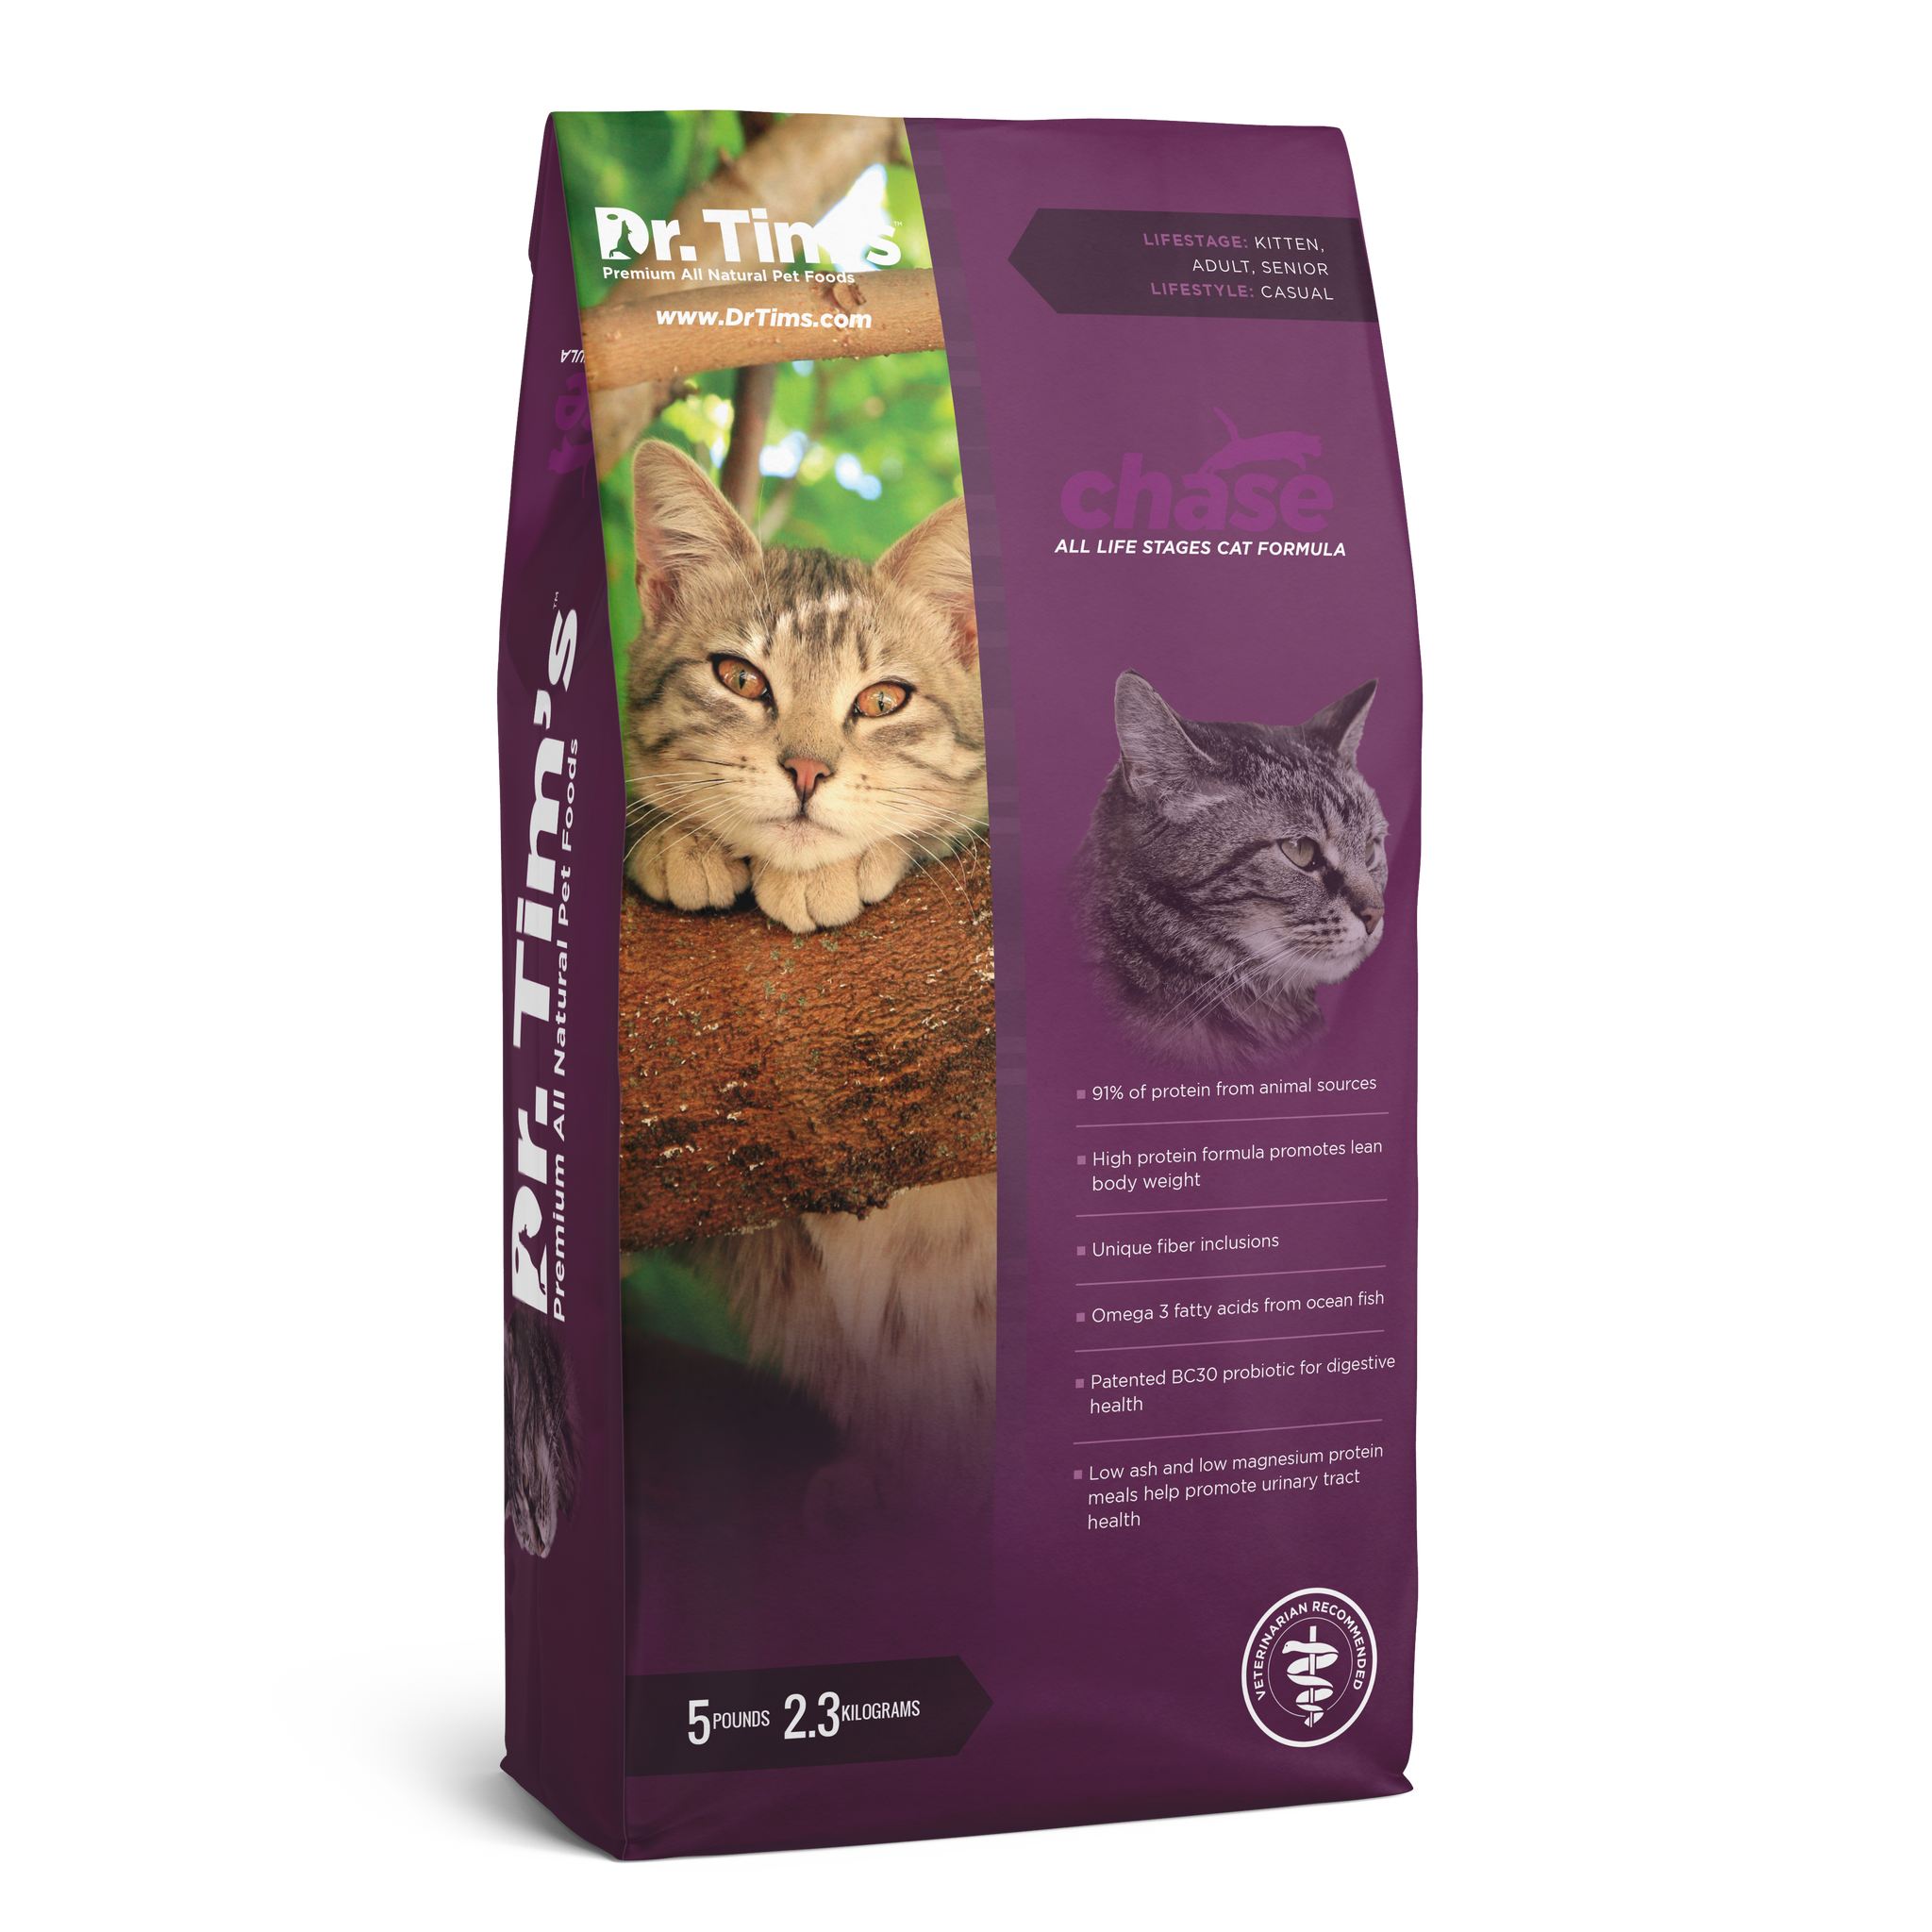 Chase Cat Food-one of the best low carbohydrate diets